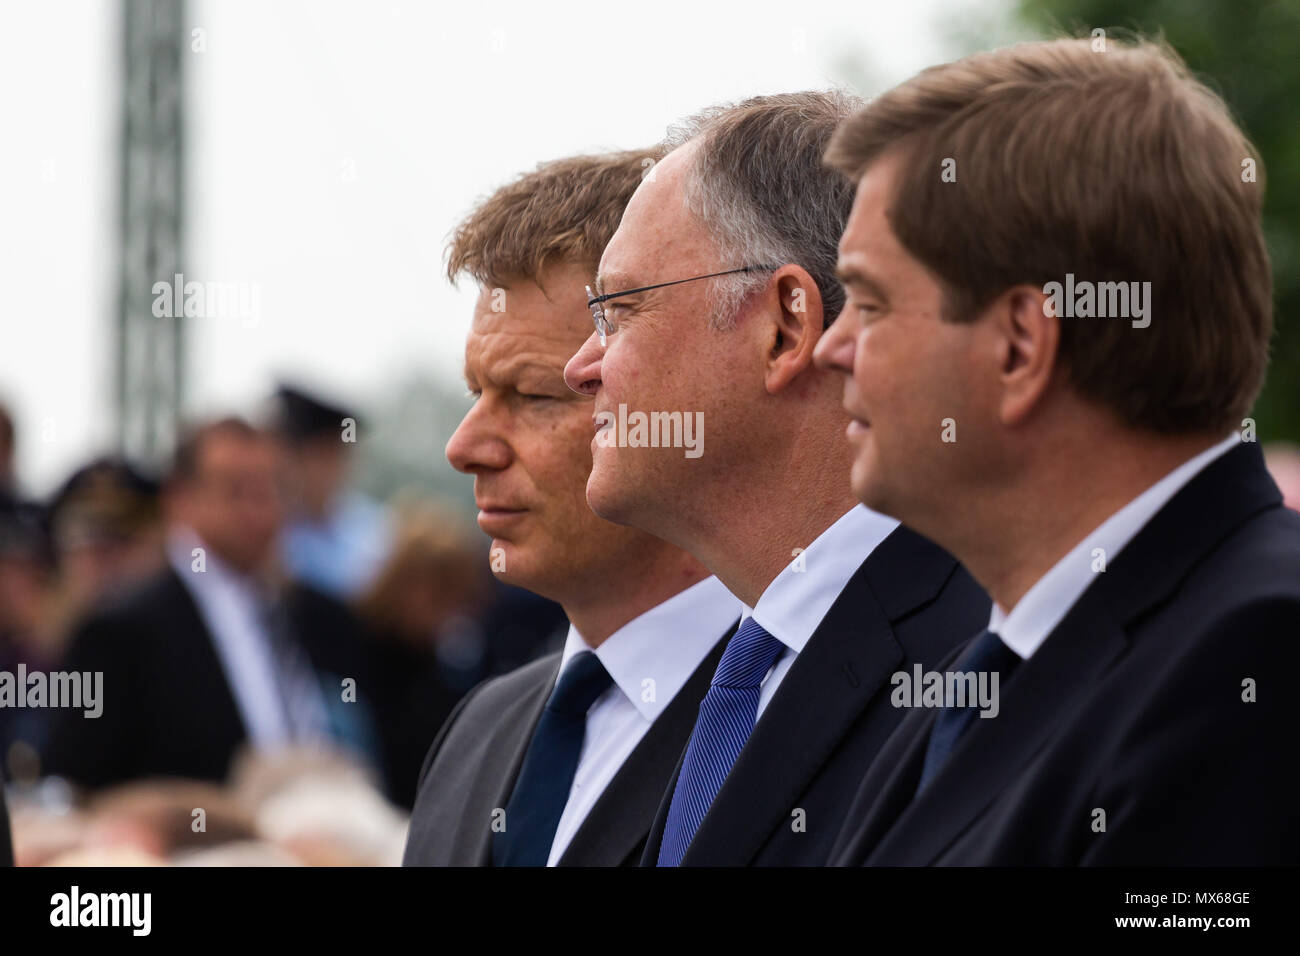 Eschede, Germany. 03 May 2018, Germany, Eschede: The Parliamentary State Secretary from the Christian Democratic Union (CDU), Enak Ferlemann (L-R), the Premier of Lower Saxony from the Social Democratic Party (SPD), Stephan Weil, and Chairman of the Deutsche Bahn, Richard Lutz, commemorating the victims of the train accident in Eschede for the 20th anniversary of the accident. The ICE 'Wilhelm Conrad Roentgen' derailed on the 3 June 1998 at tempo 200 and drove into a highway bridge. 101 people died. Photo: Philipp von Ditfurth/dpa Stock Photo